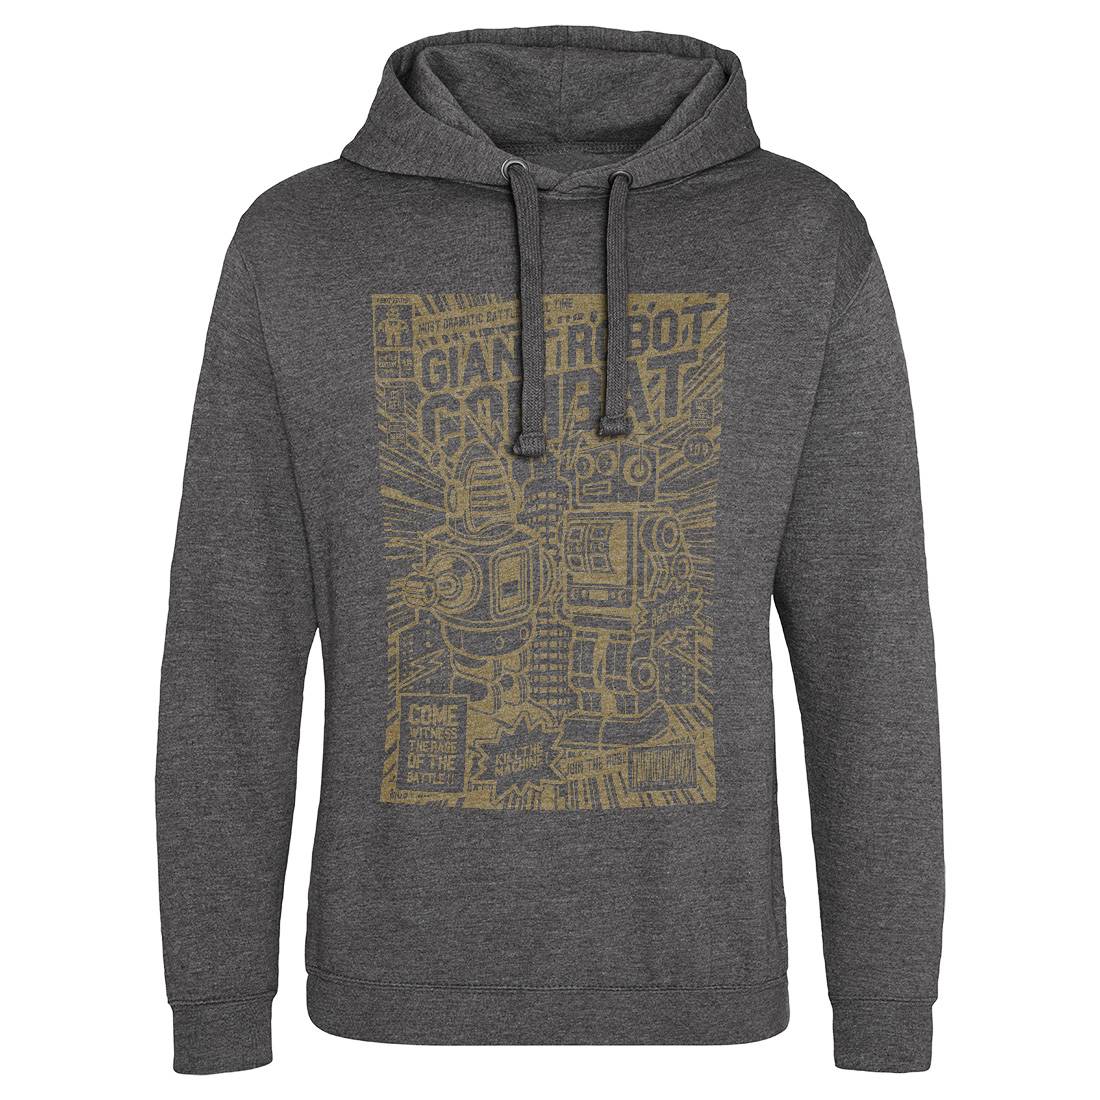 Giant Robot Combat Mens Hoodie Without Pocket Space A233